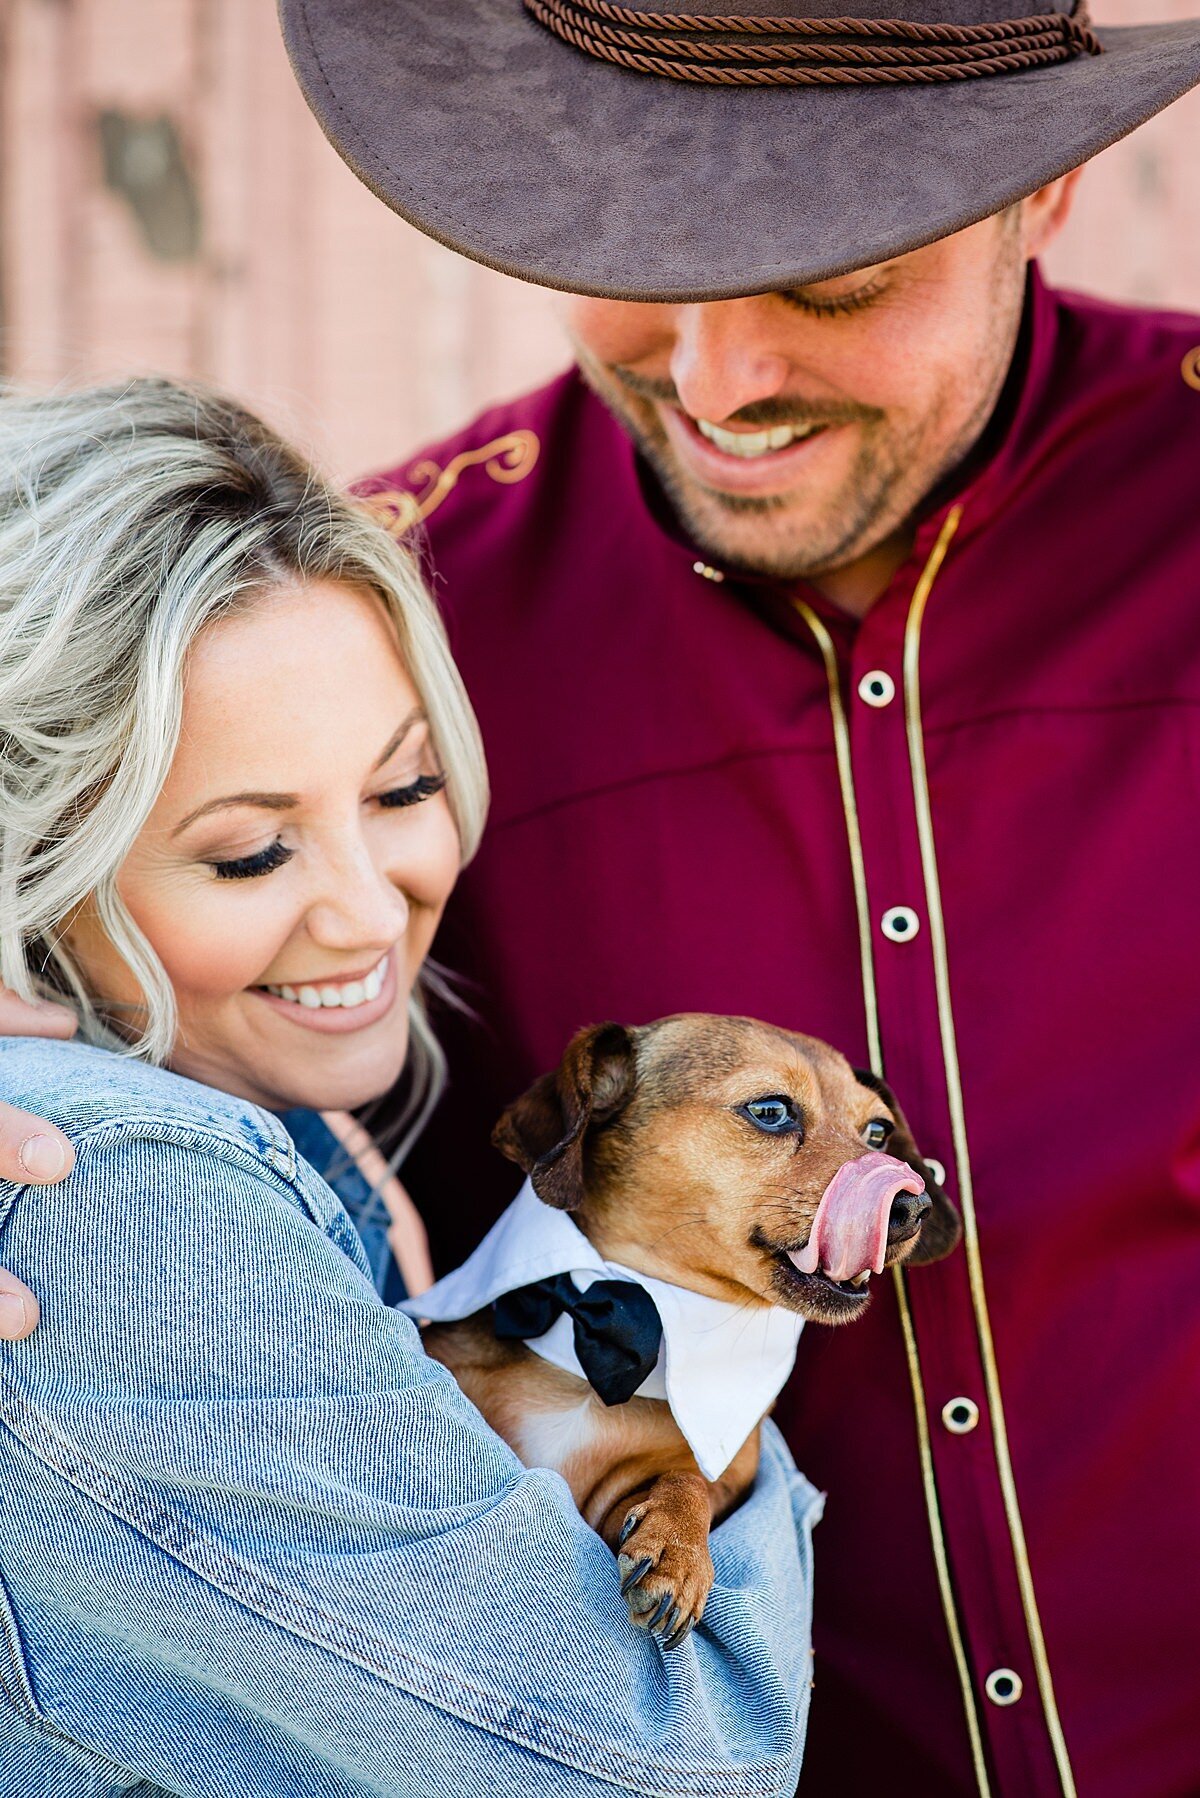 The groom wearing a maroon western shirt and brown cowboy hat smiles down at the bride and their dog. The bride is wearing a denim jacket as she leans into the groom's embrace. She is holding a small dog who is wearing a white shirt collar with a small black bowtie.